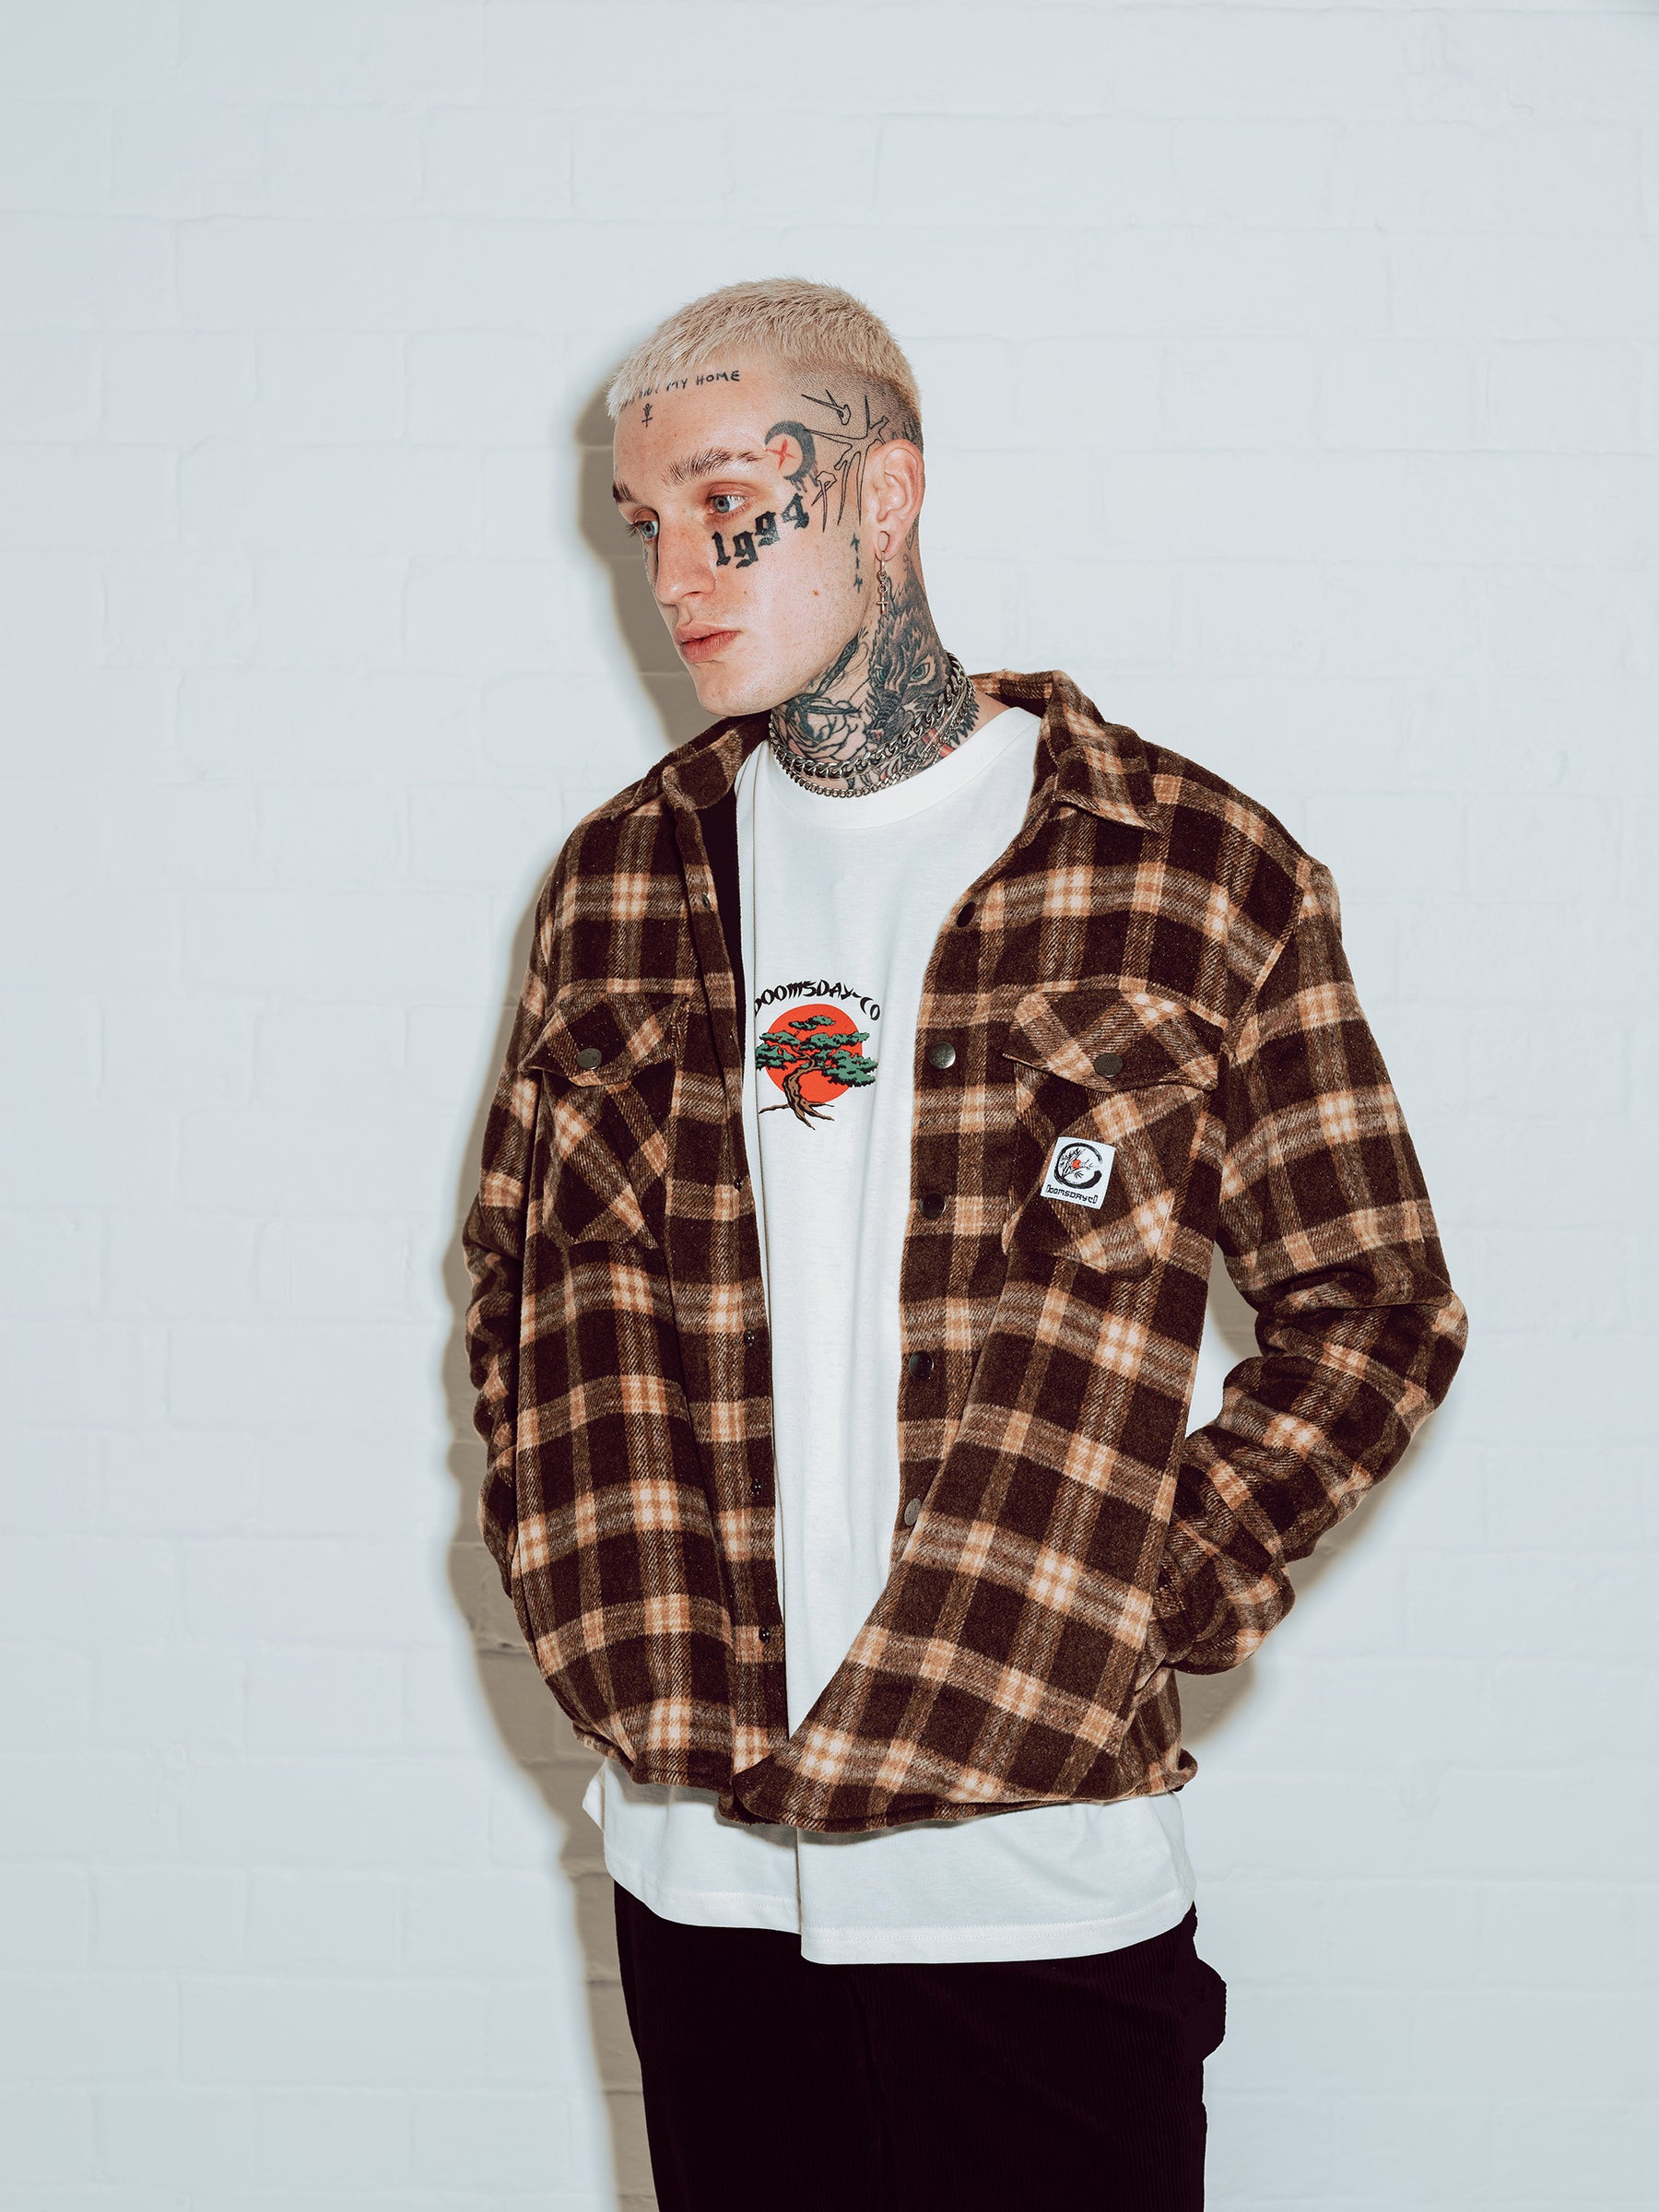 Independent Streetwear Brand - Shop Online from Doomsdayco.com